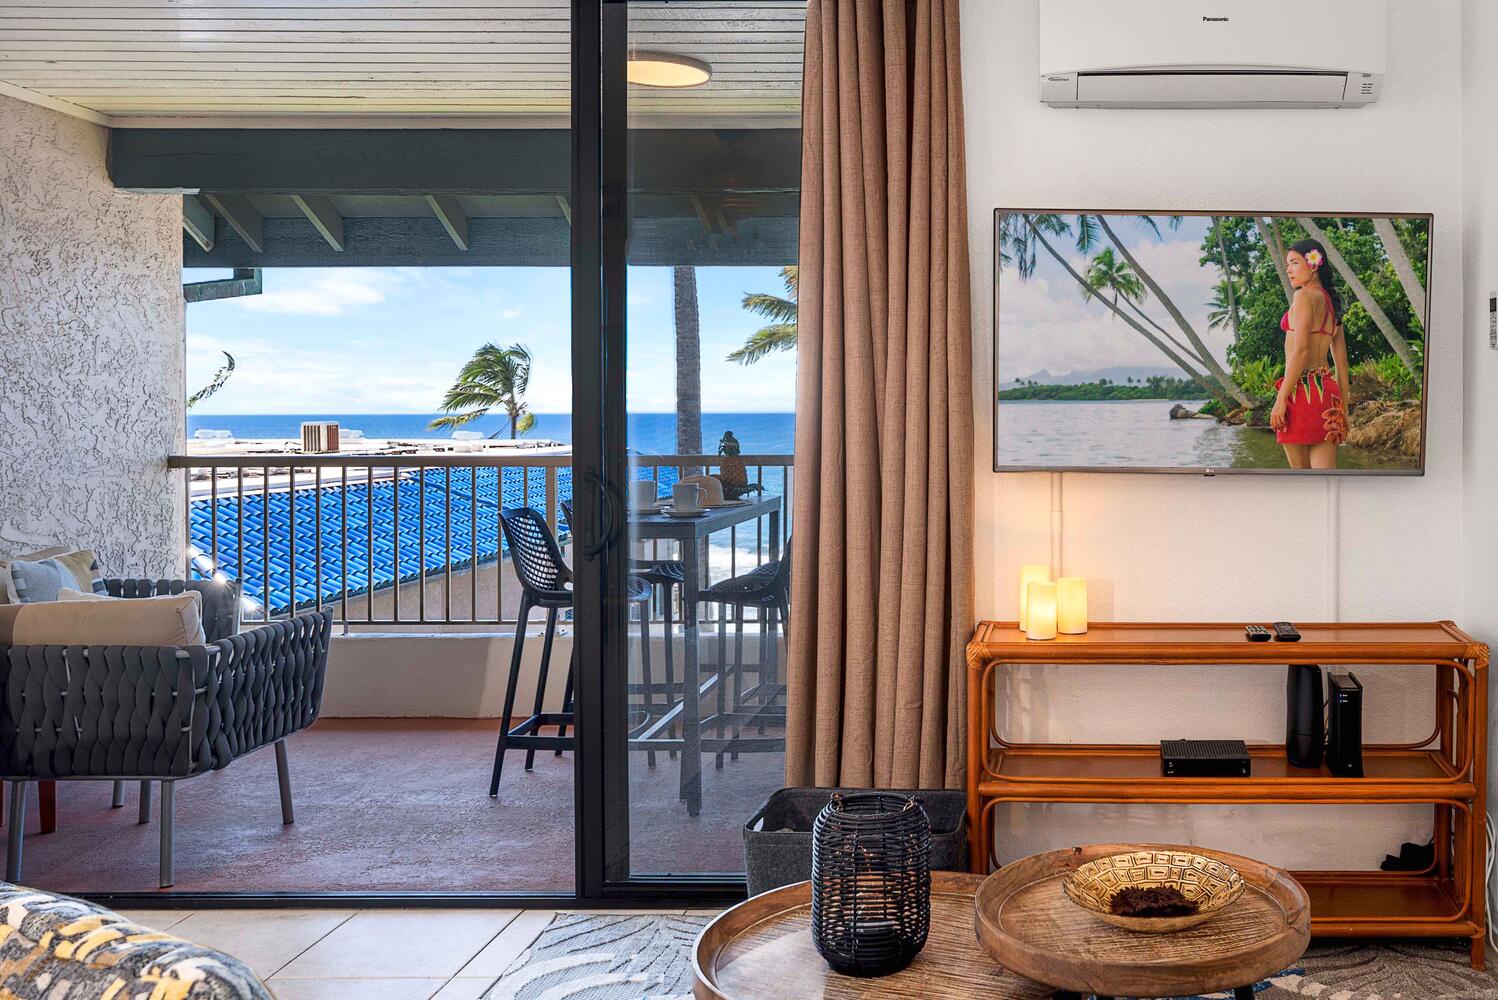 Kailua Kona Vacation Rentals, Kona Reef F23 - Cozy corner with easy access to the balcony for indoor-outdoor living by the sea.